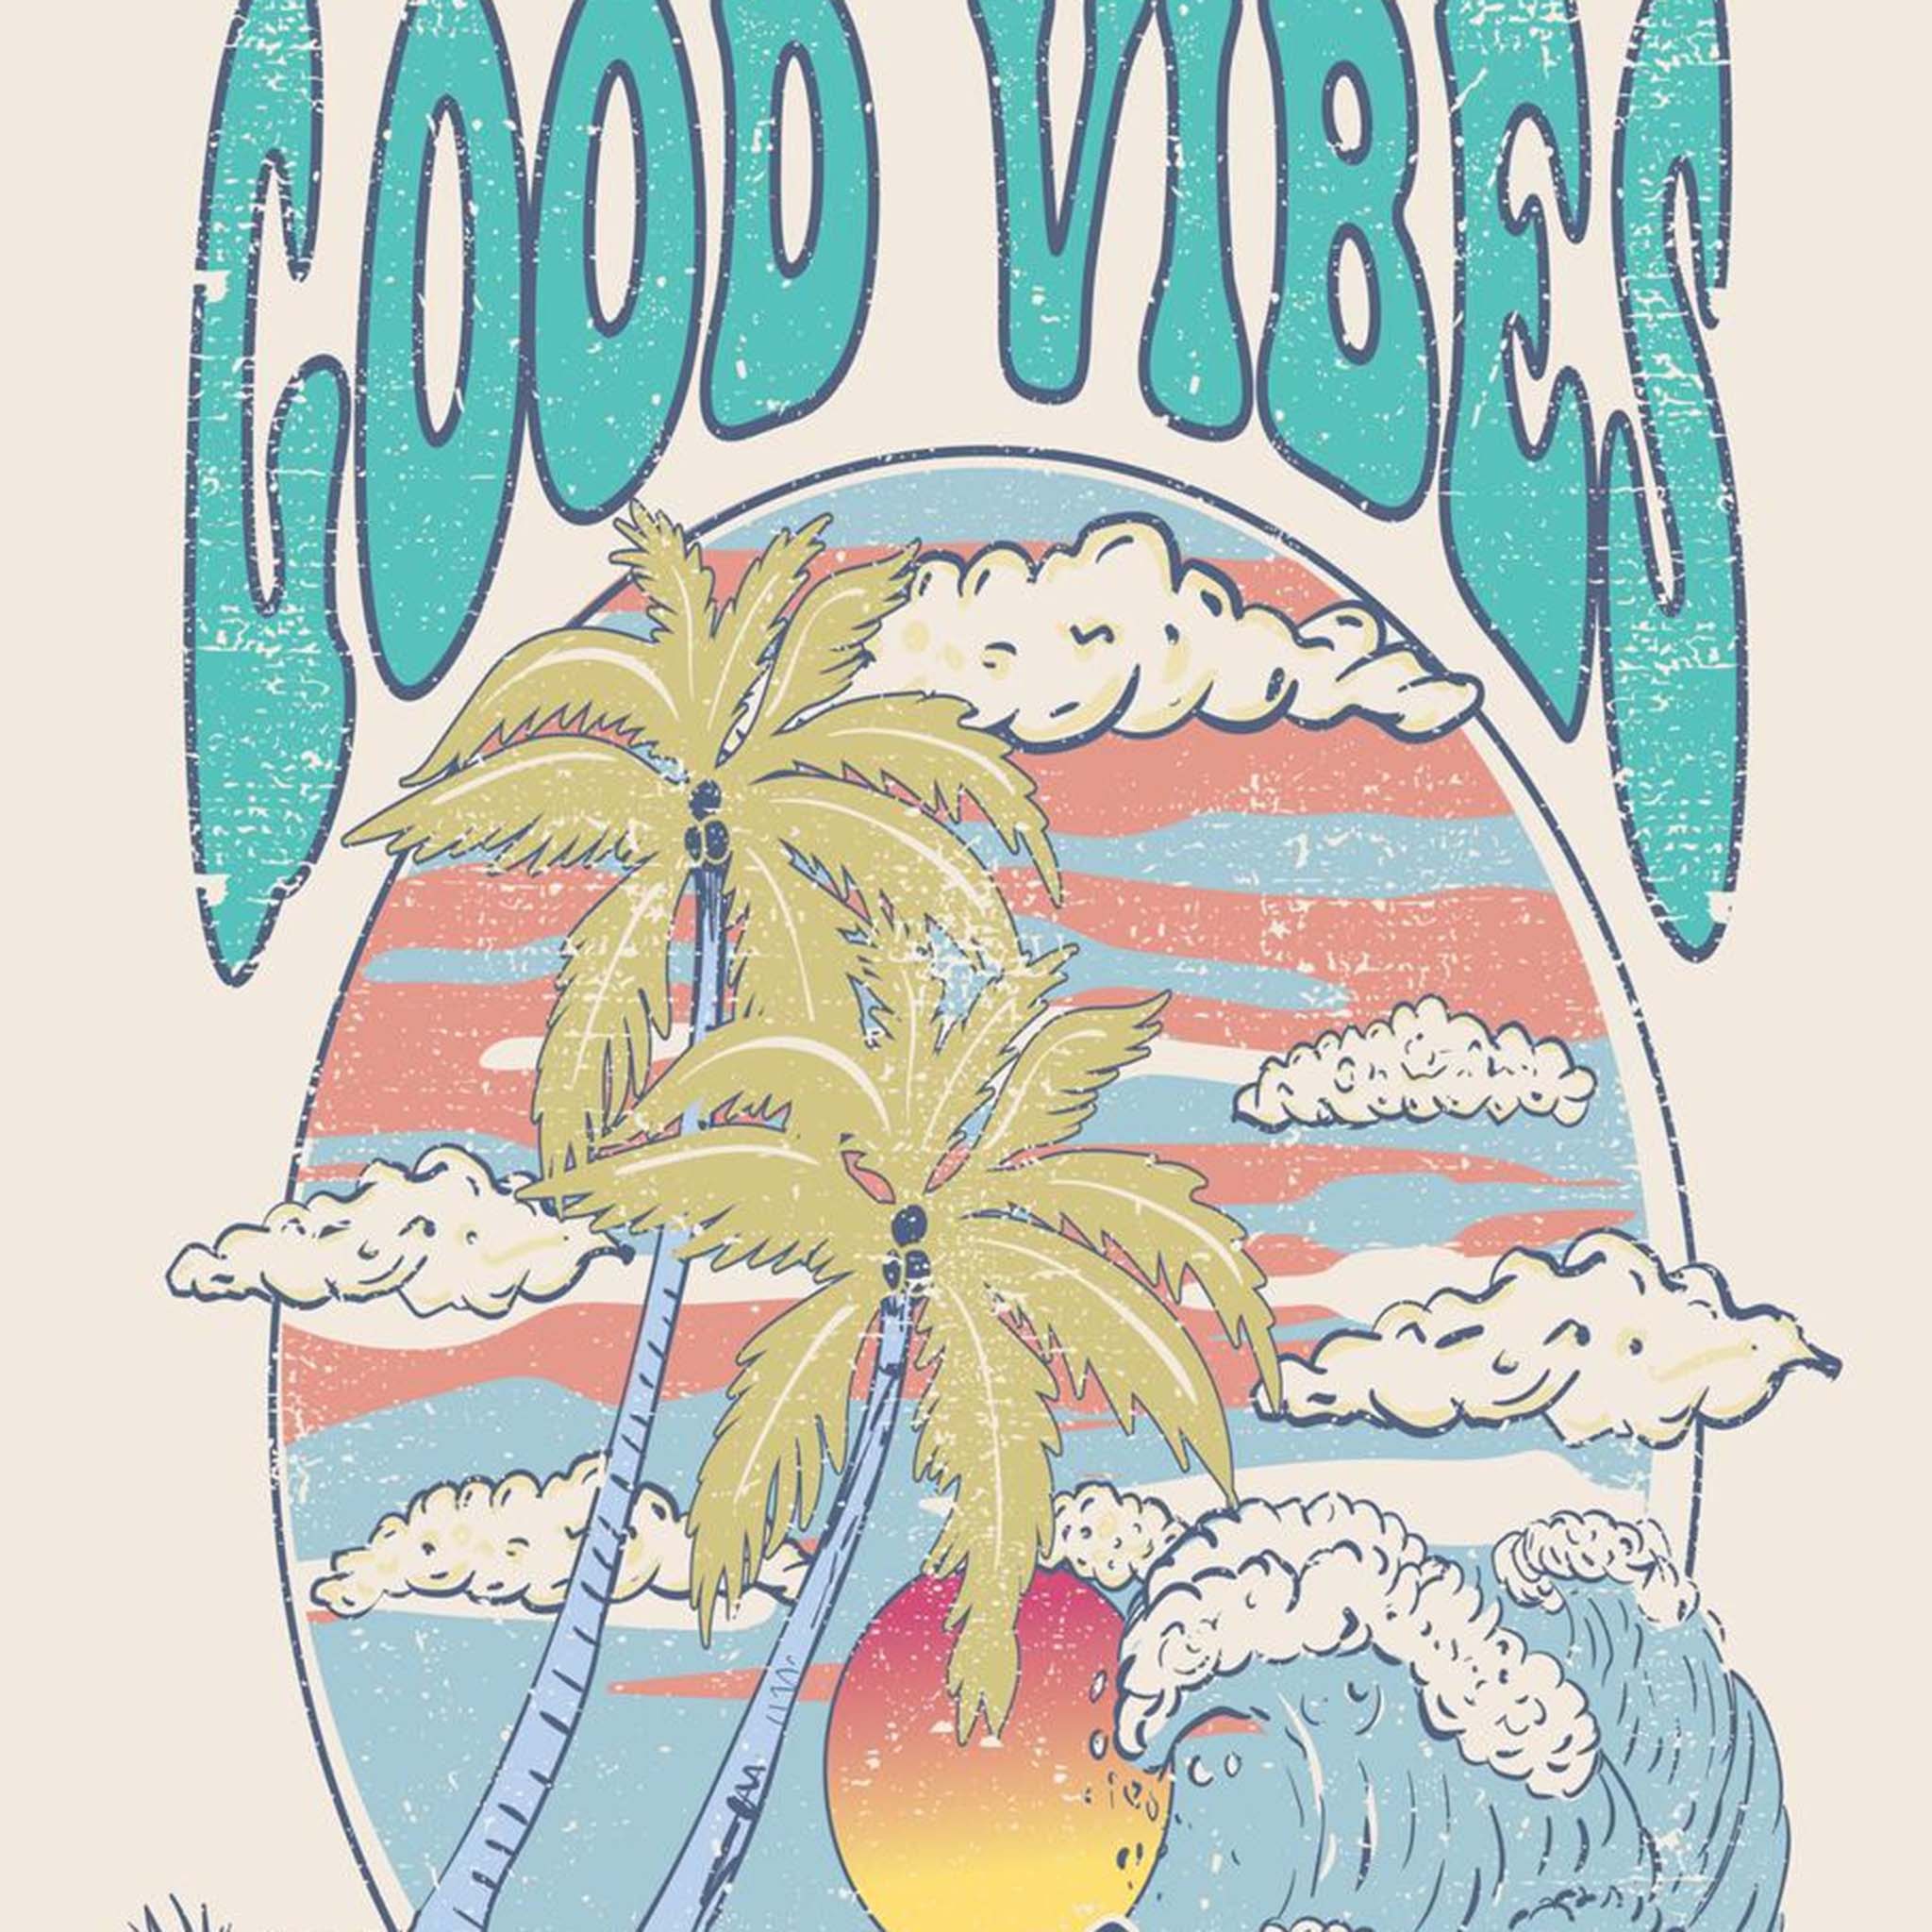 Close-up of an A4 rice paper design featuring the words Good Vibes and Endless Summer surrounding a sun kissed scene with palm trees and a setting sun.